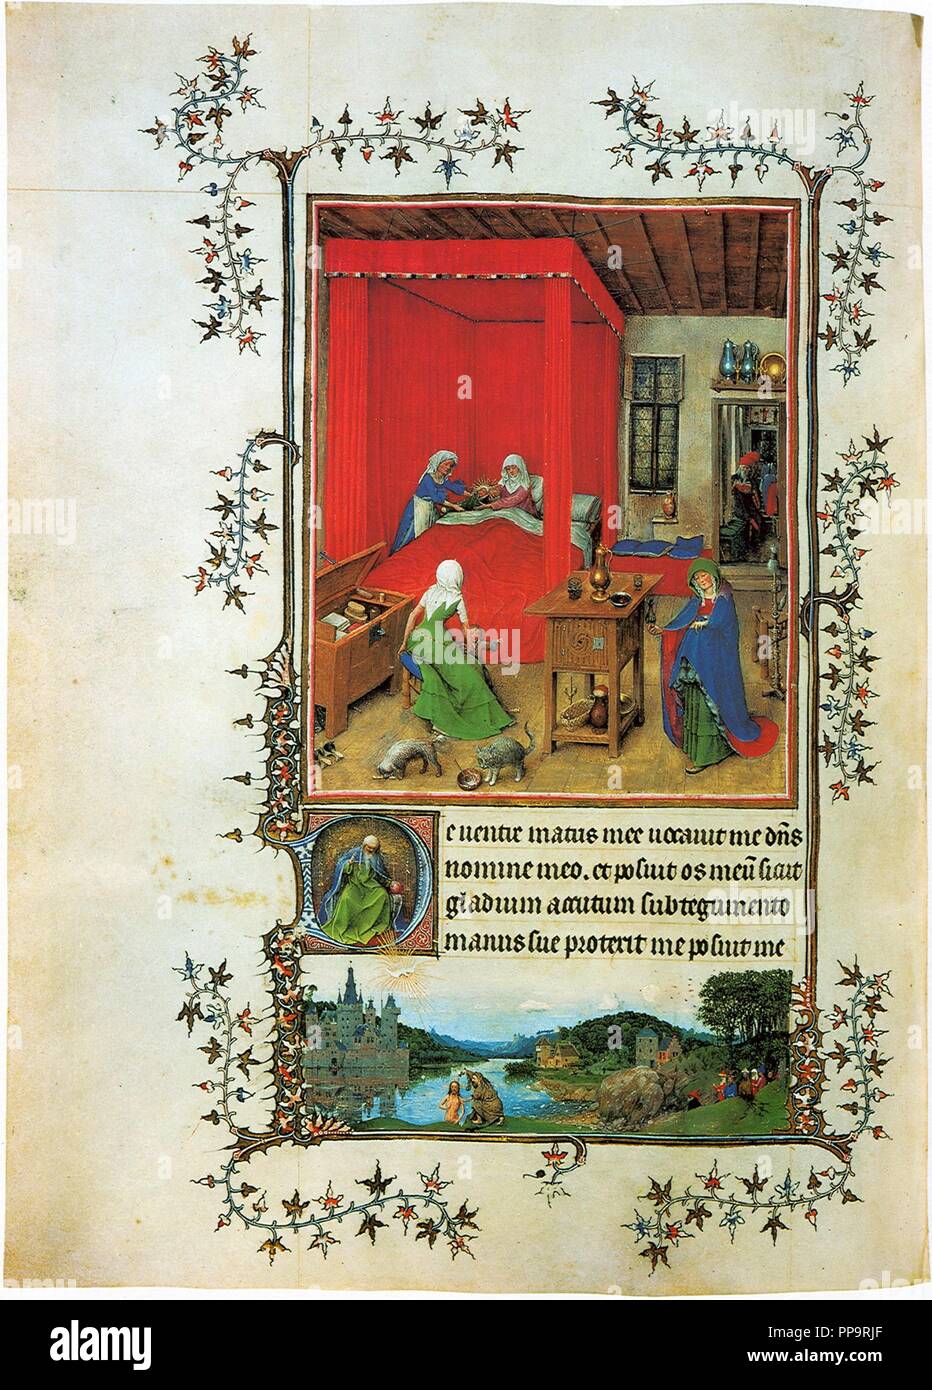 The Birth of John the Baptist (from the Turin-Milan Hours). Museum: Museo Civico d' Arte Antica, Turin. Author: Master of the Turin-Milan Hours. Stock Photo